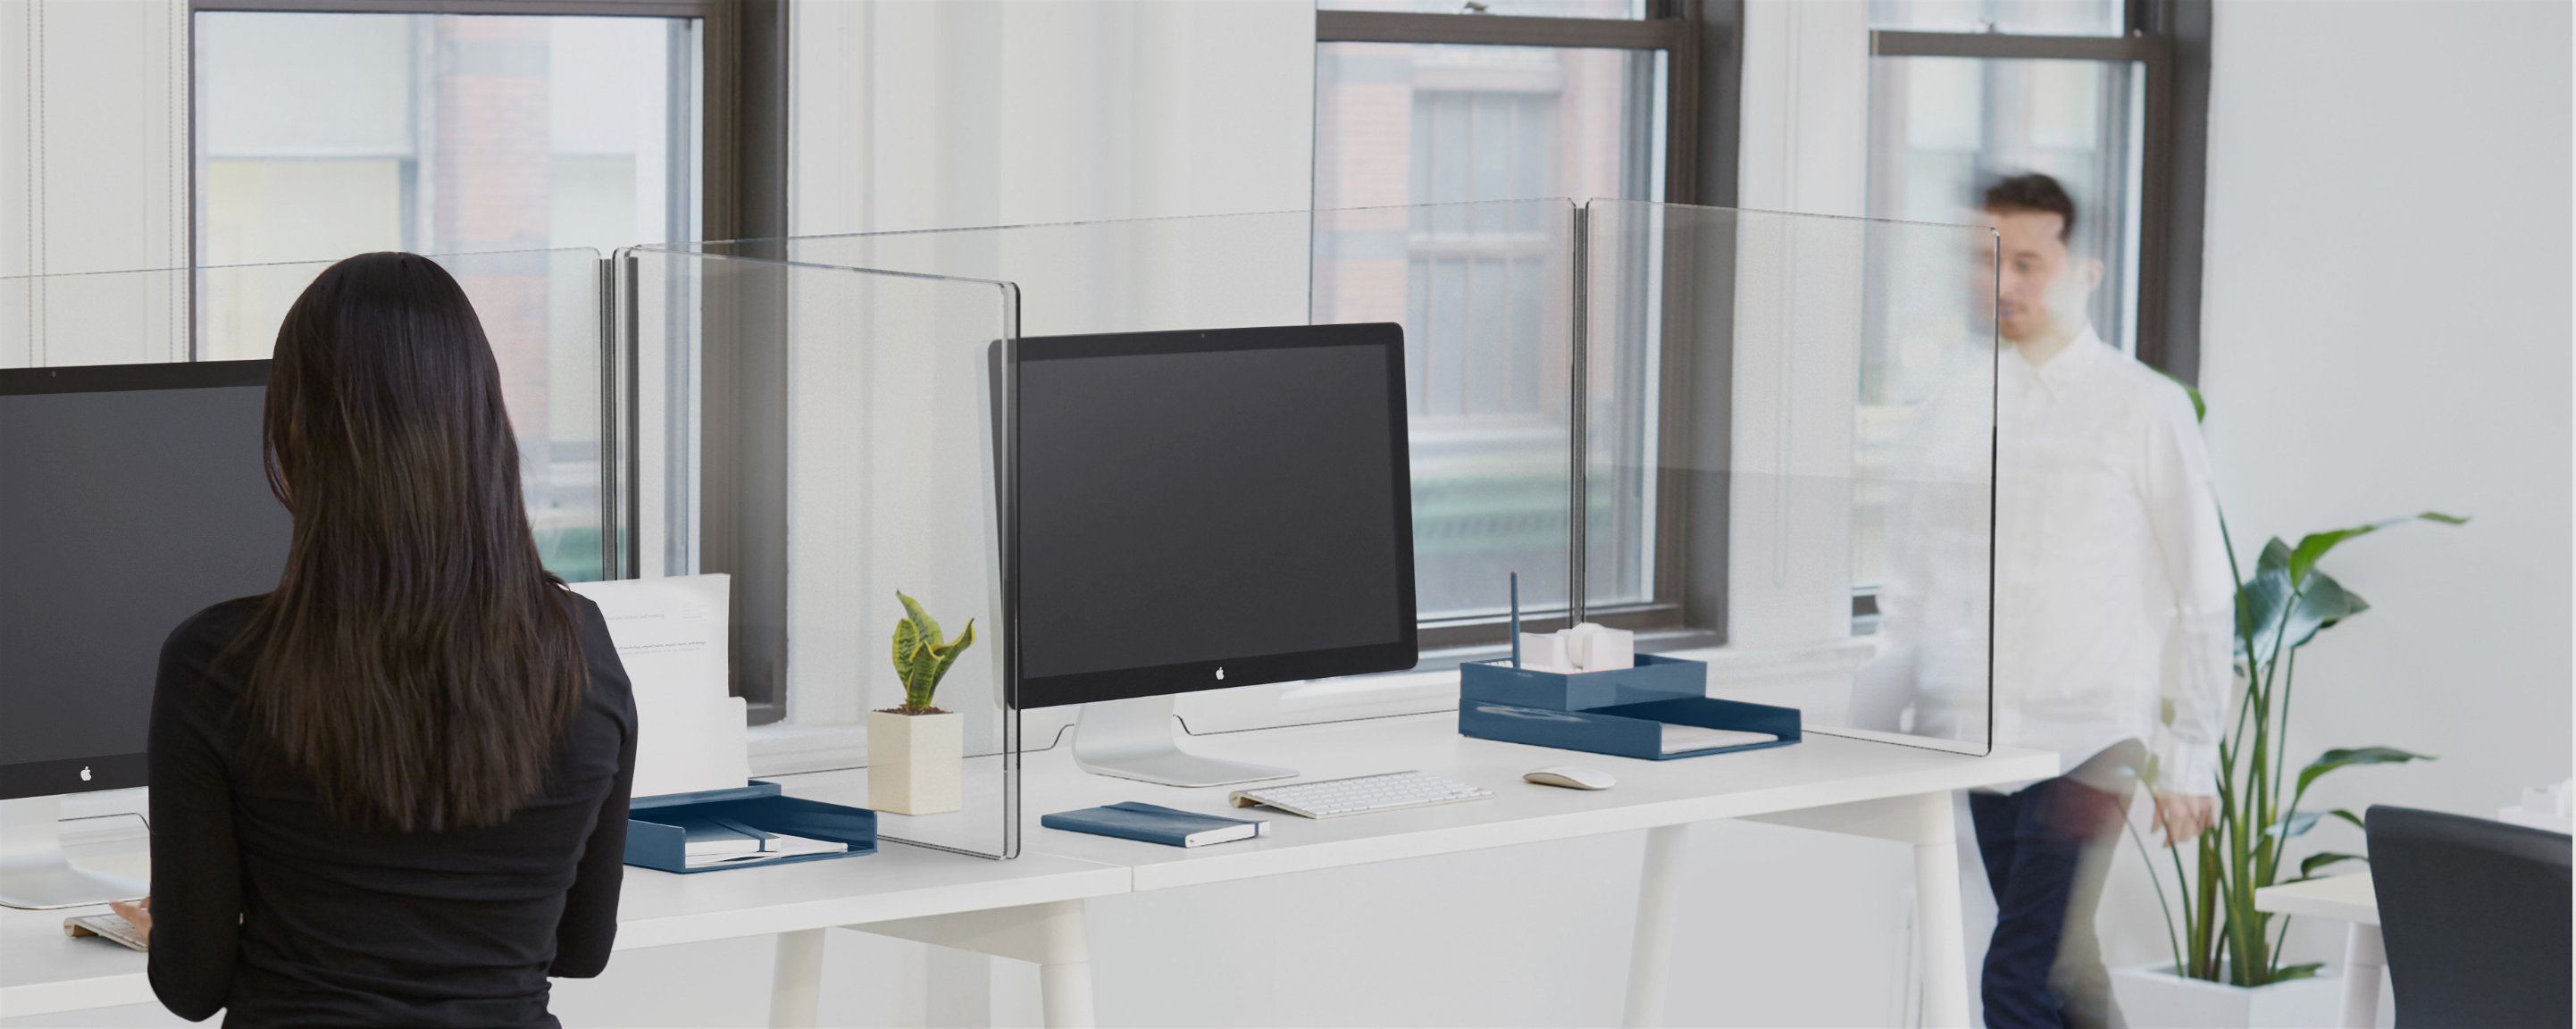 Protective Acrylic Shields for the Office